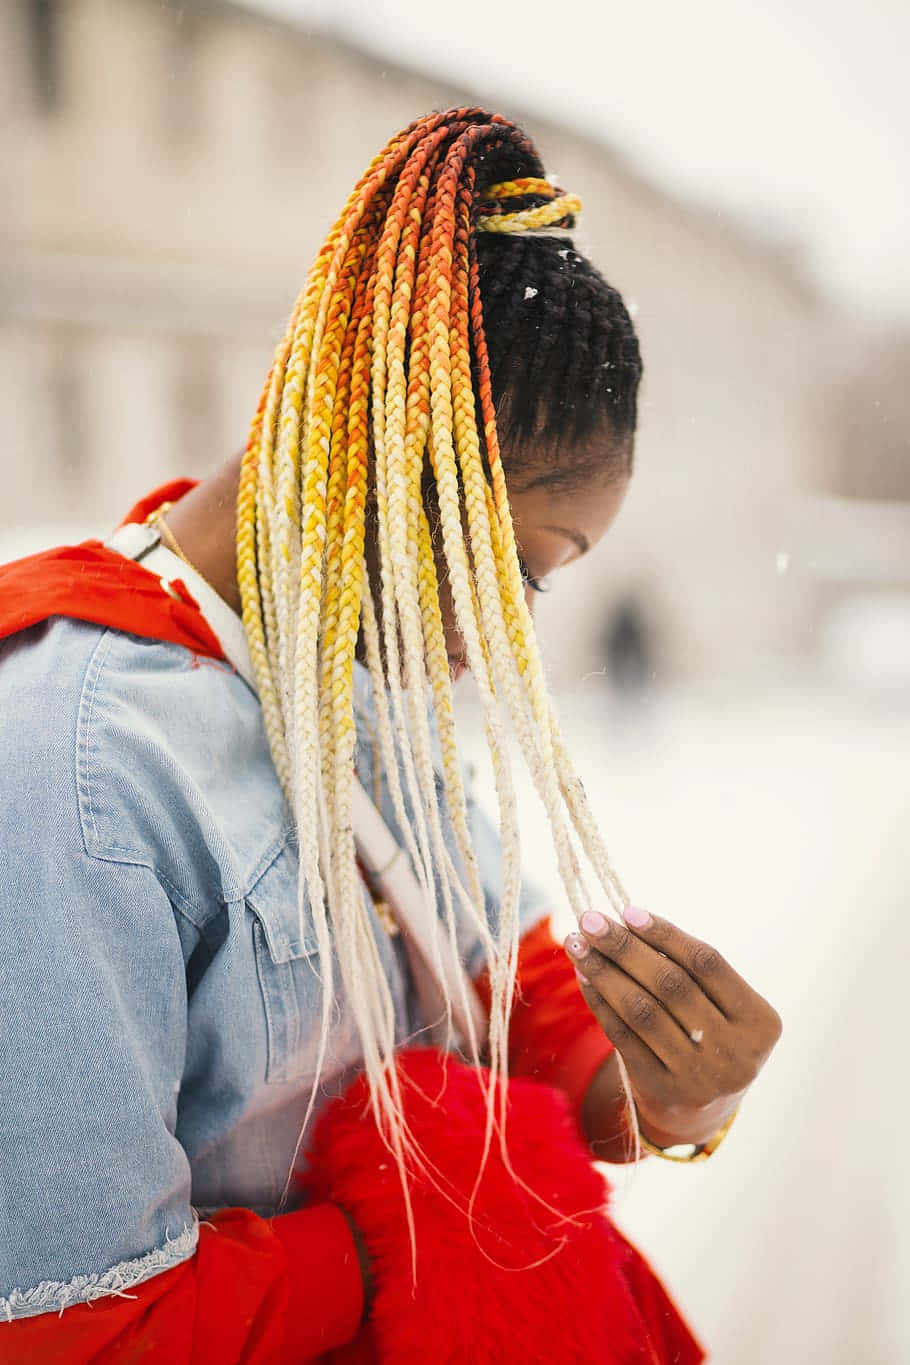 A Woman With Colorful Braids In The Snow